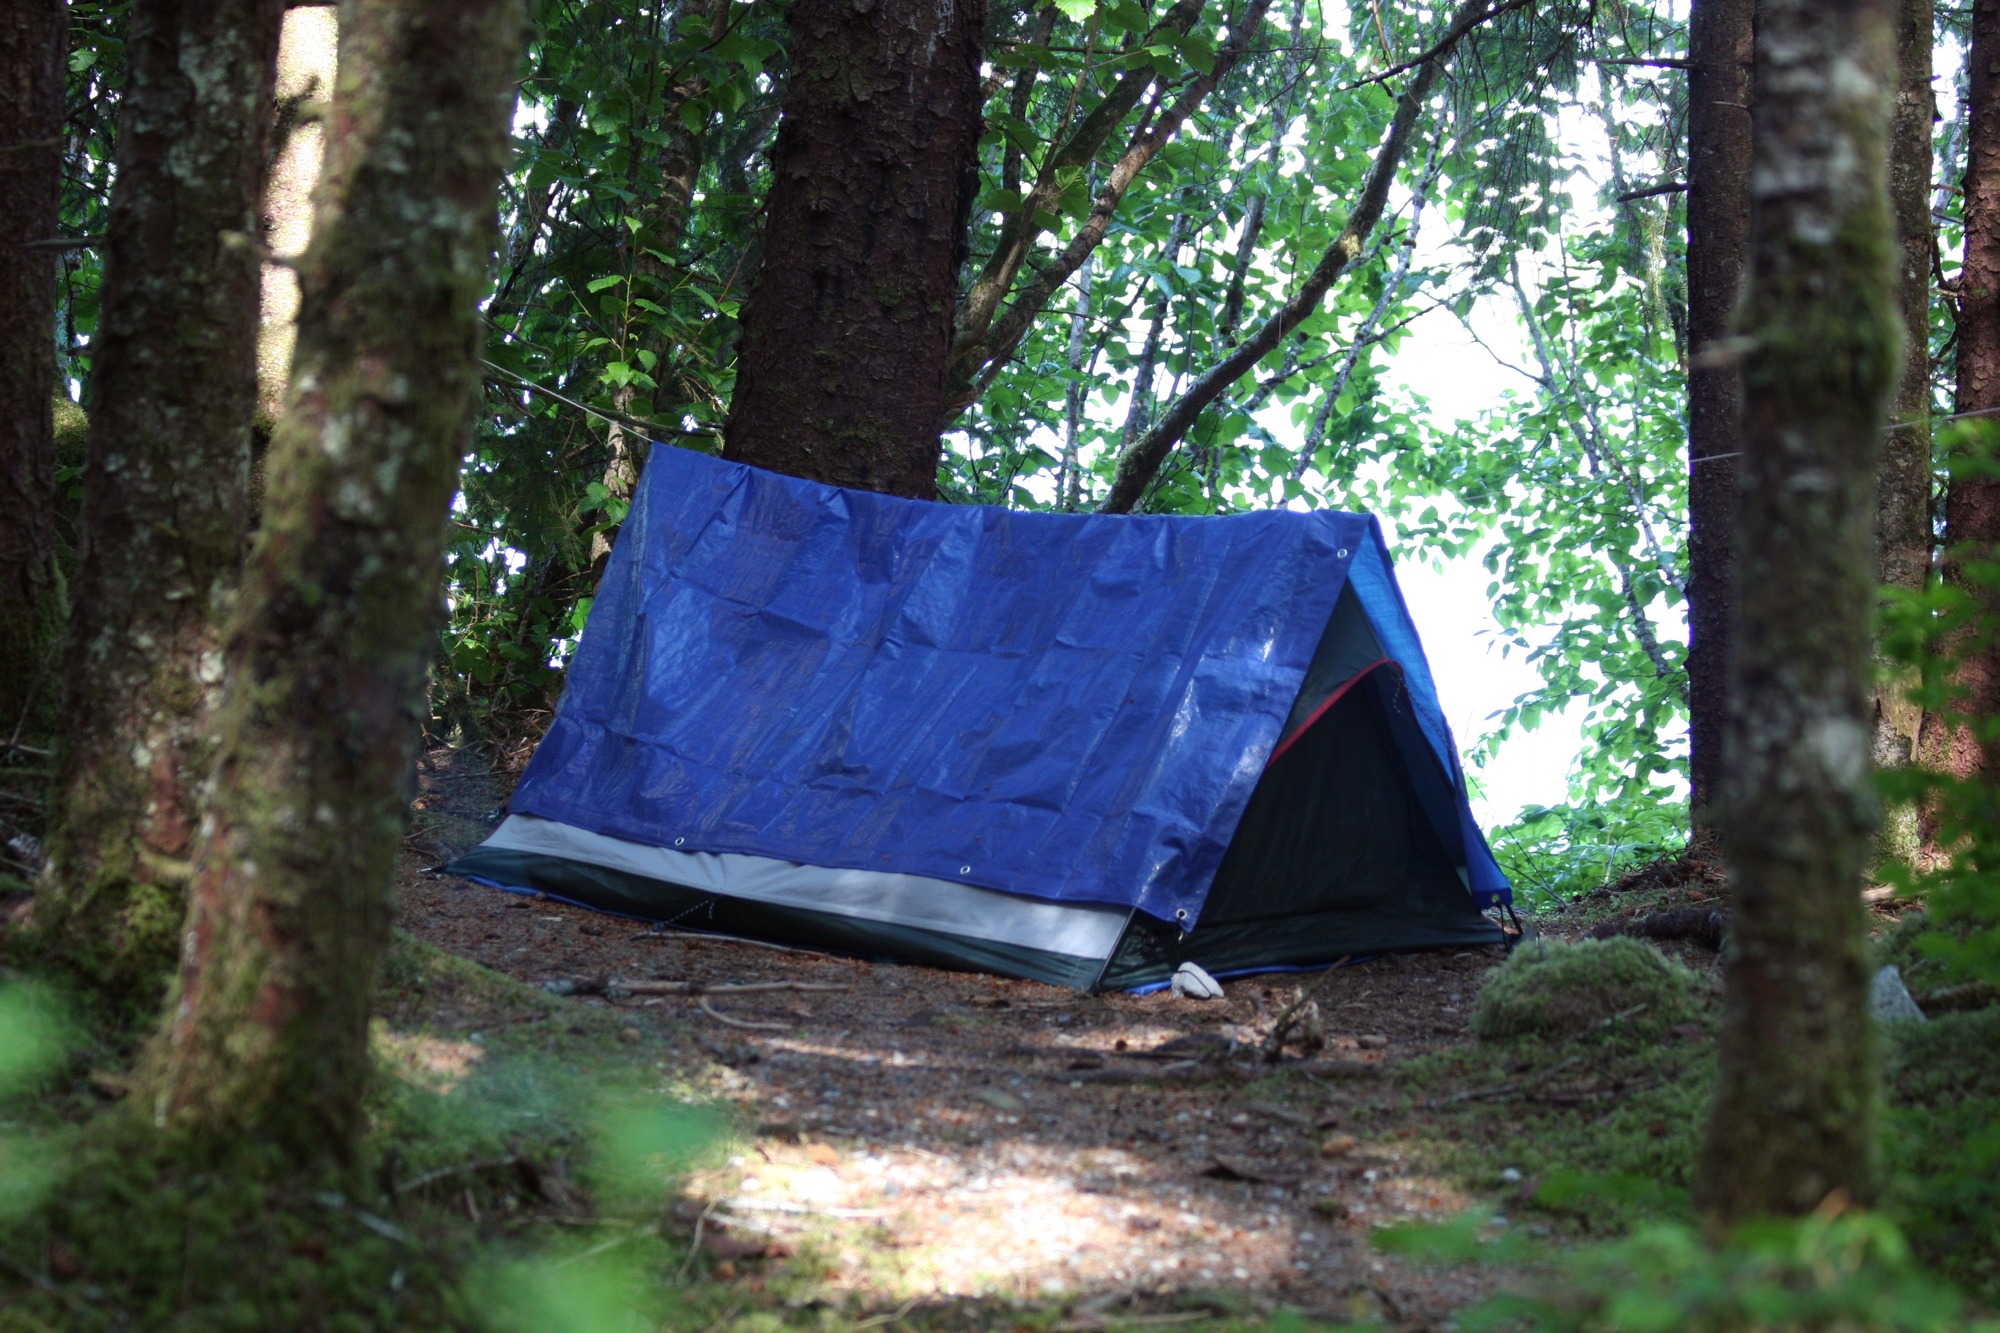 A small tent with a blue tarp draped over it sits in a clearing between trees.